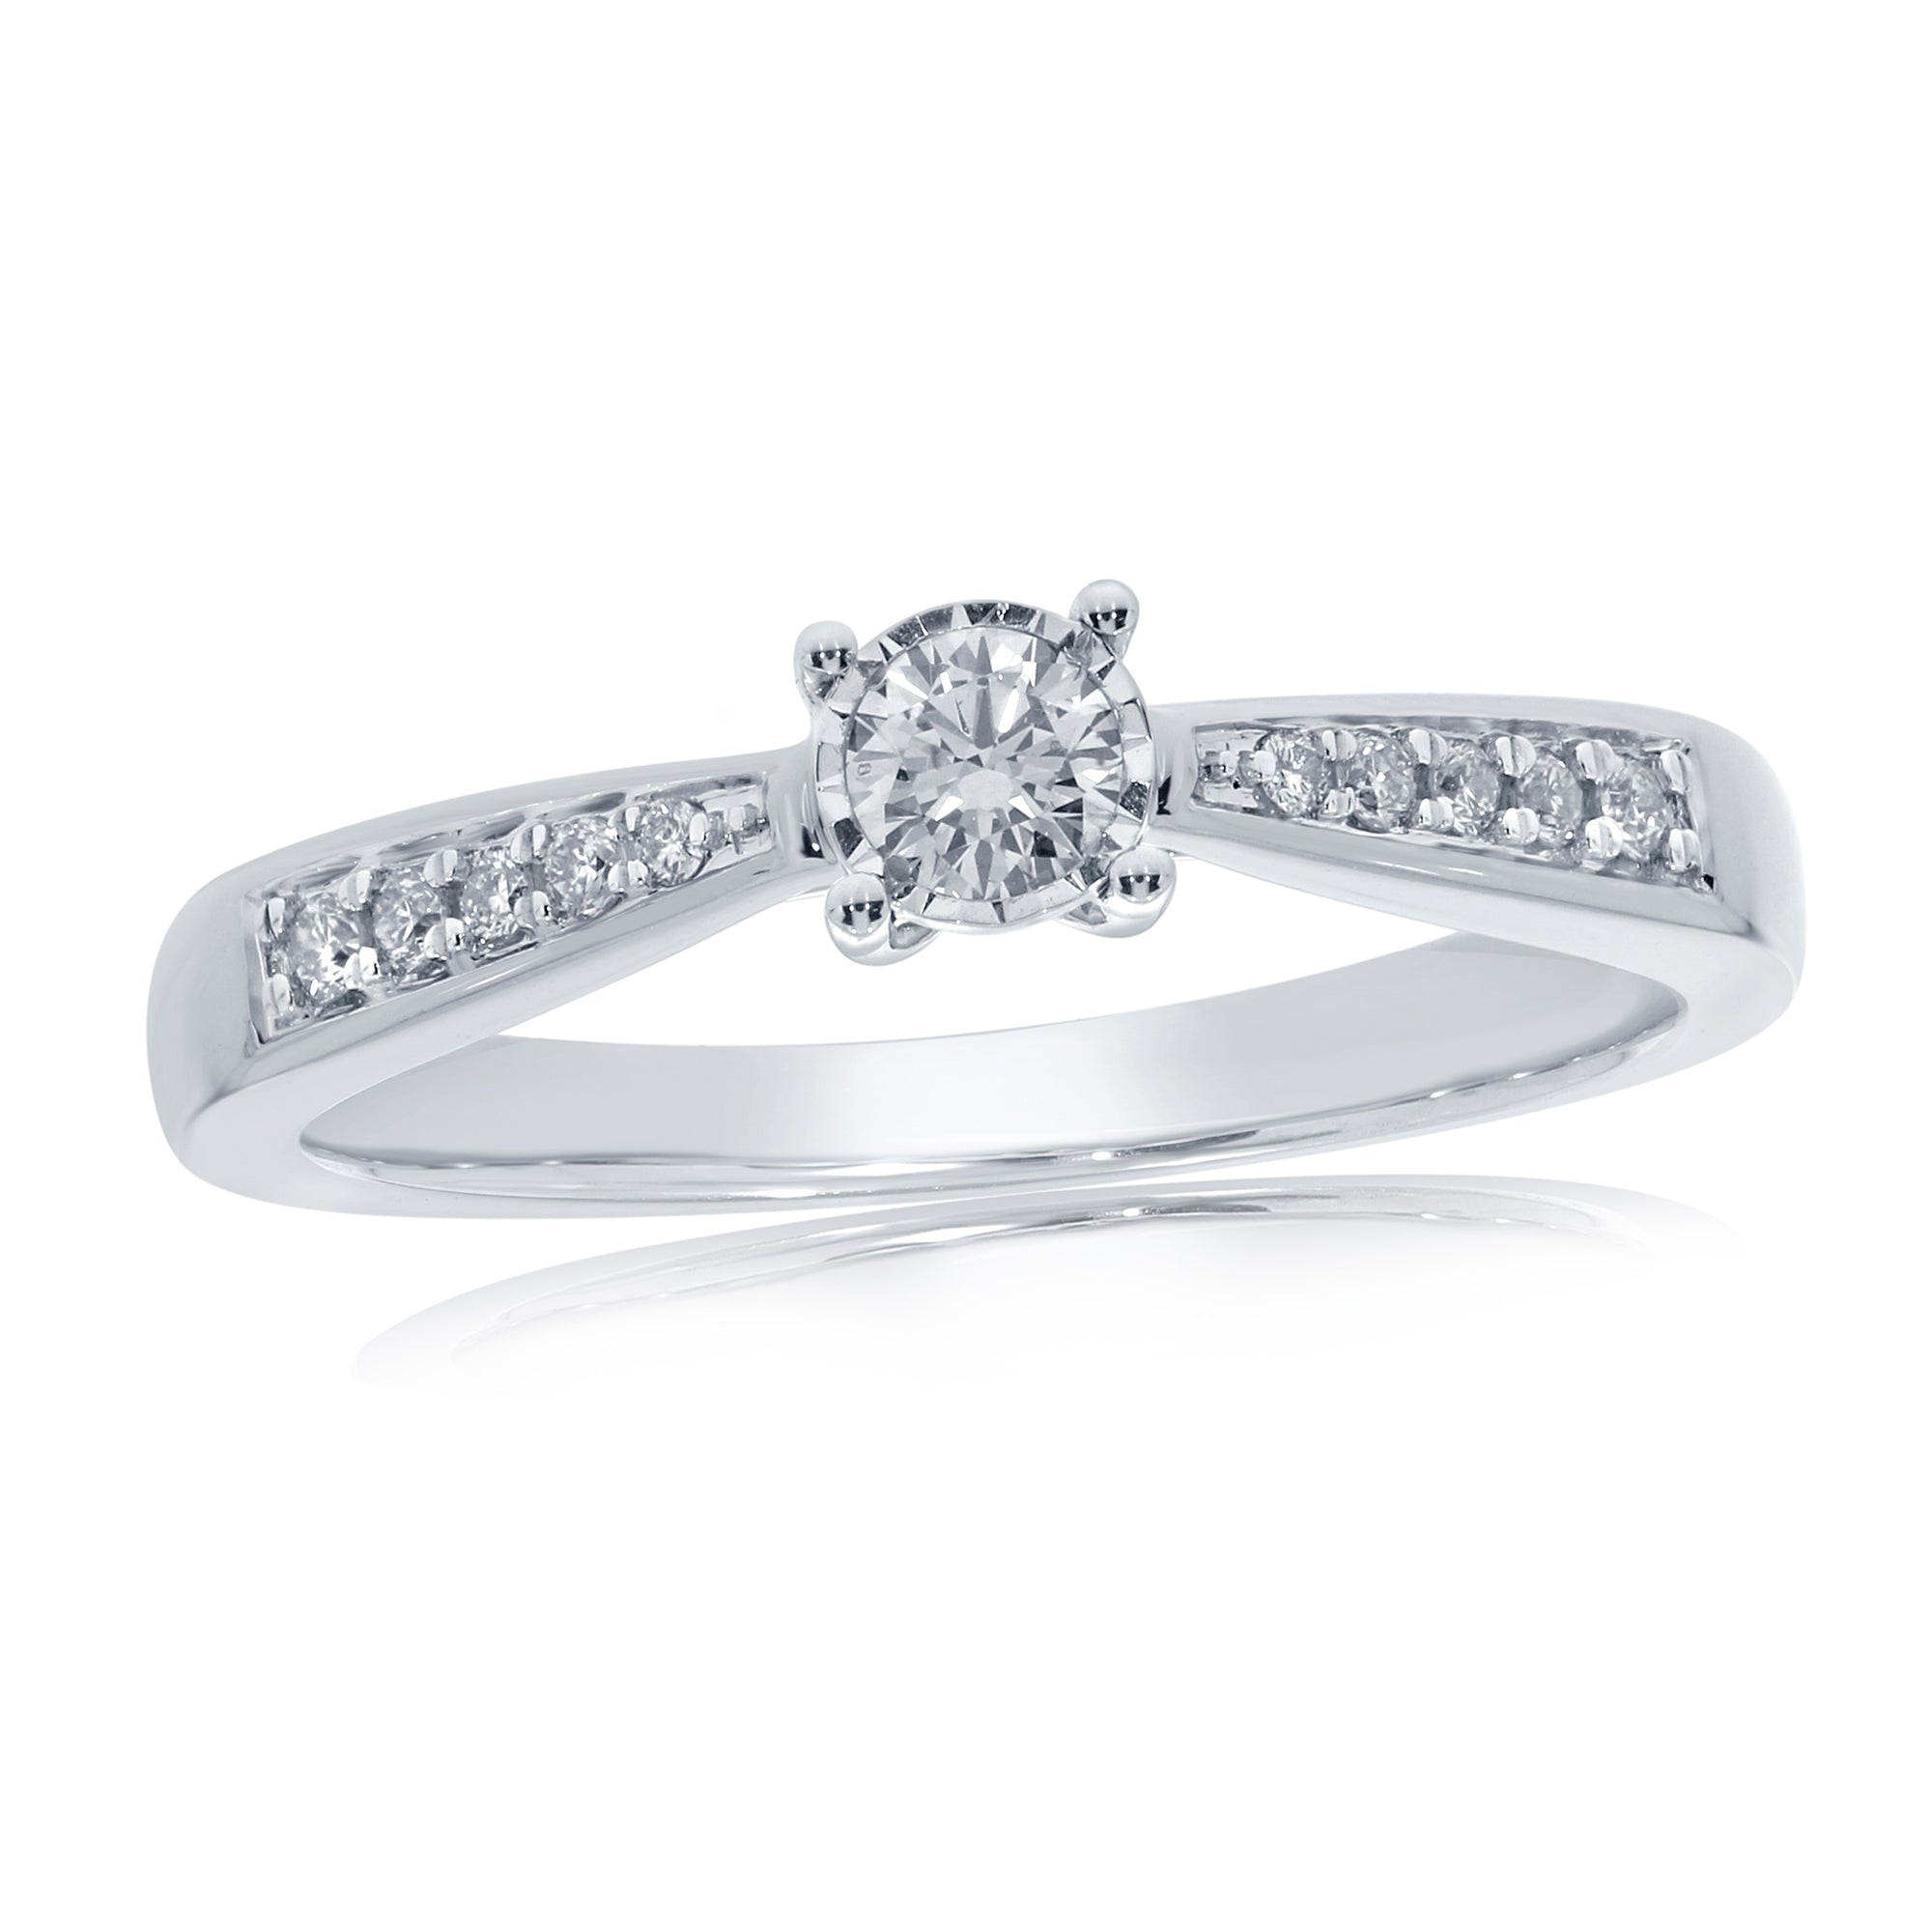 9ct white gold single stone miracle plate diamond ring with diamond set shoulders 0.19ct